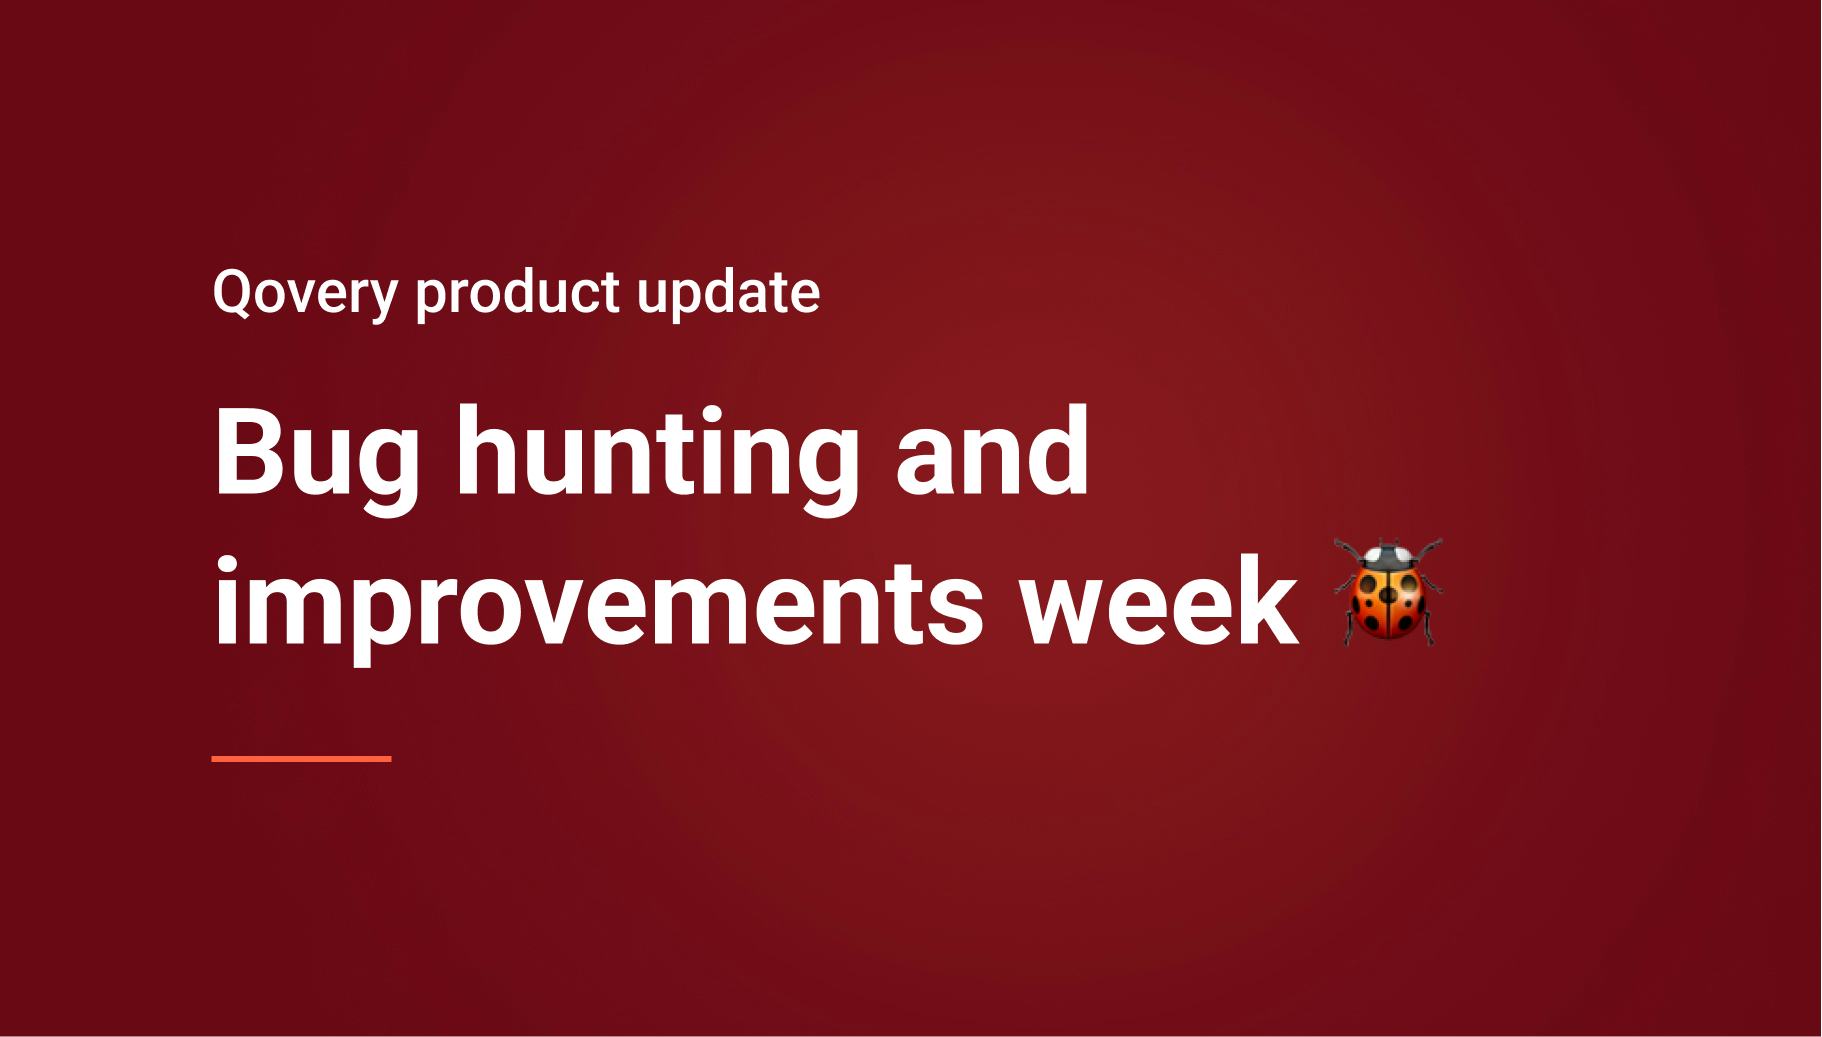 Bug Hunting and improvements week - what we improve on Qovery